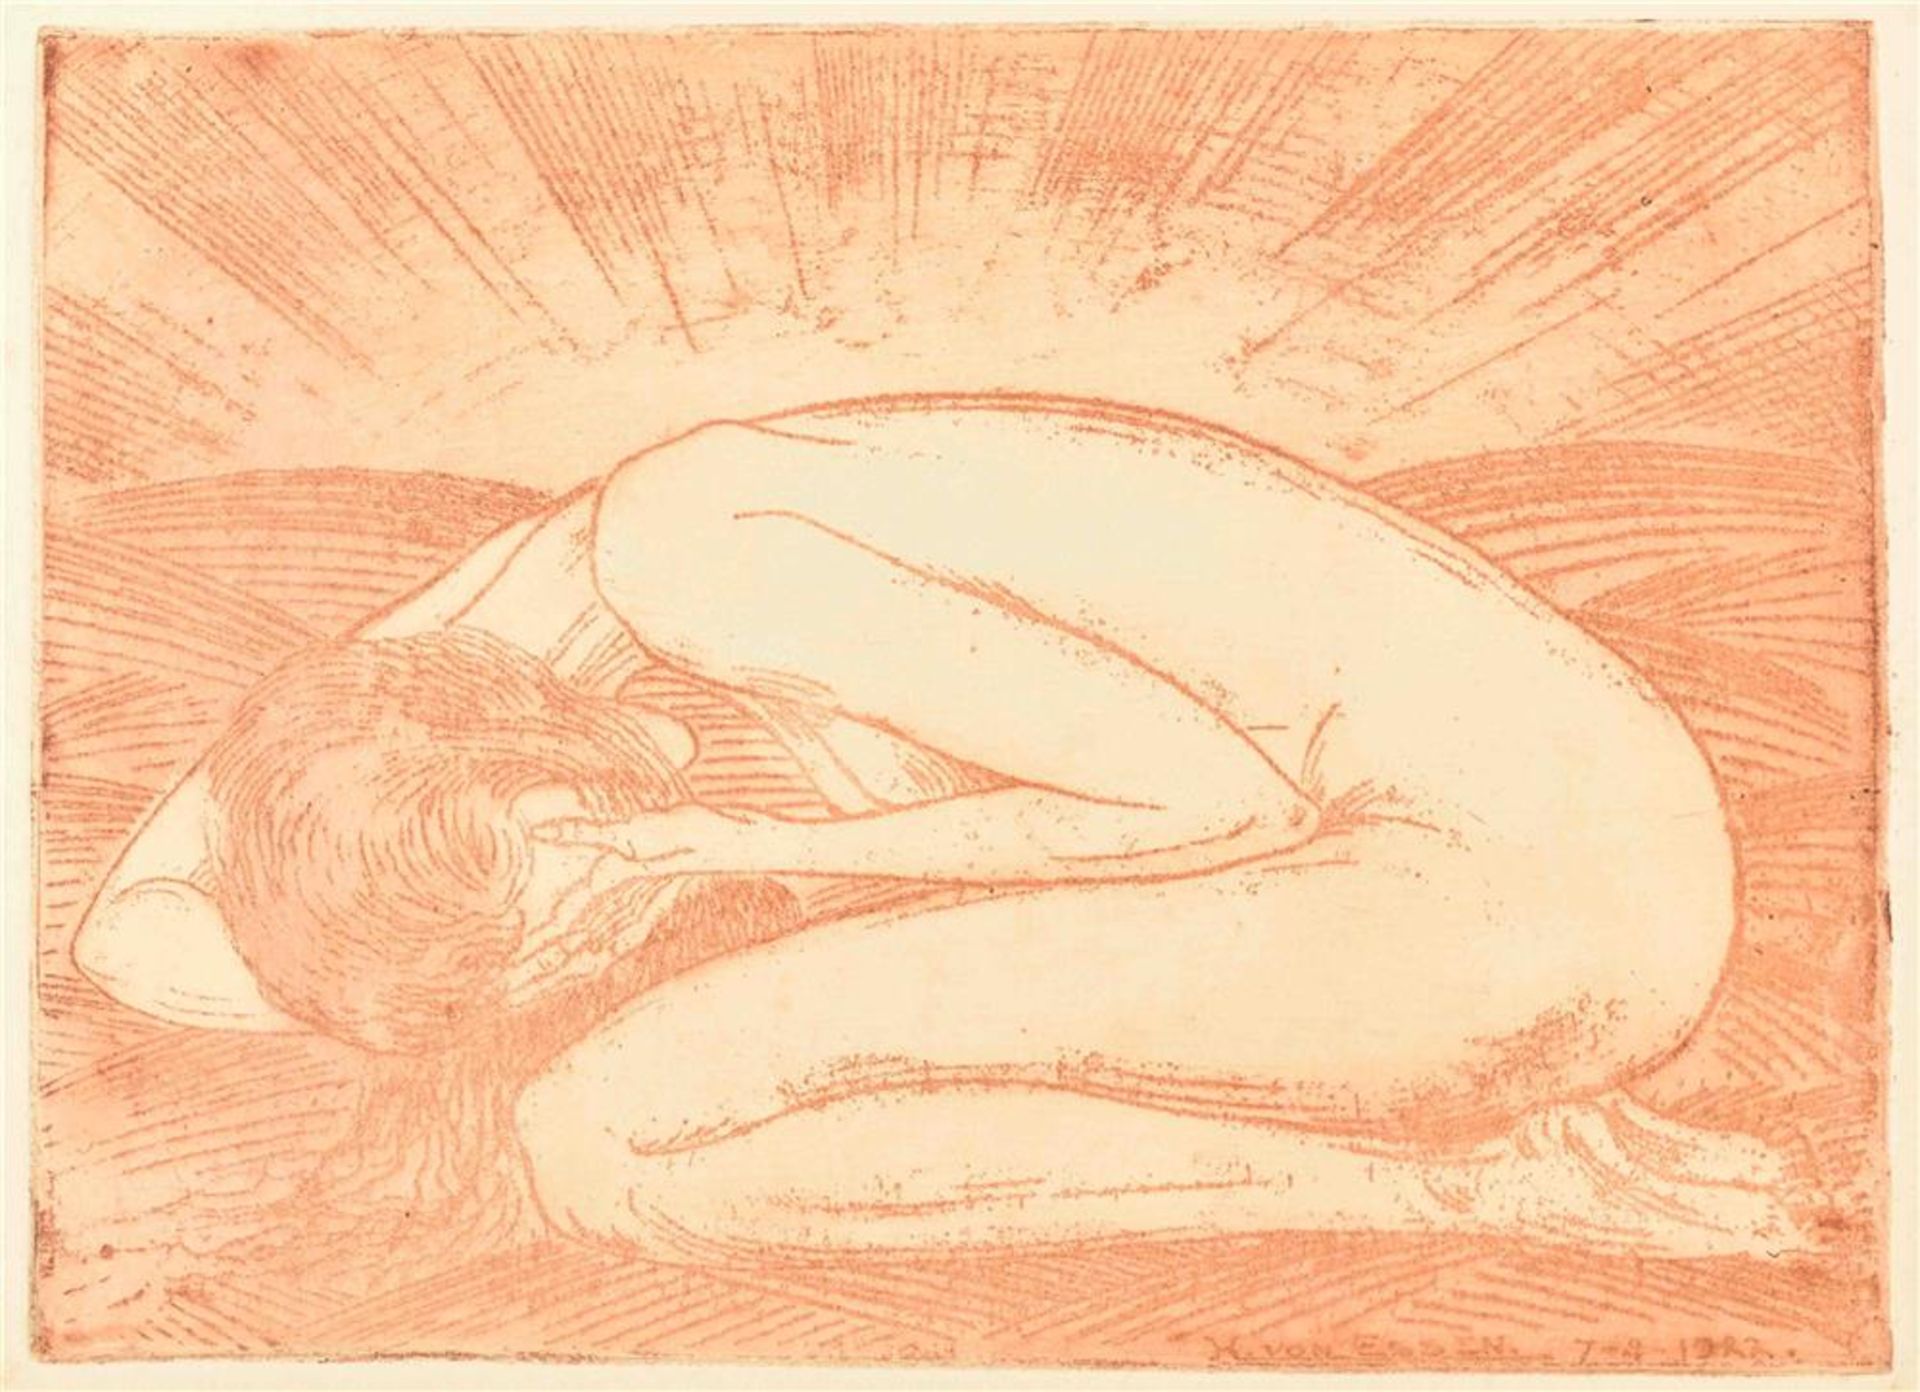 Essen, H. von (1886-1947). Four etchings: (1) 'Crying nude woman'